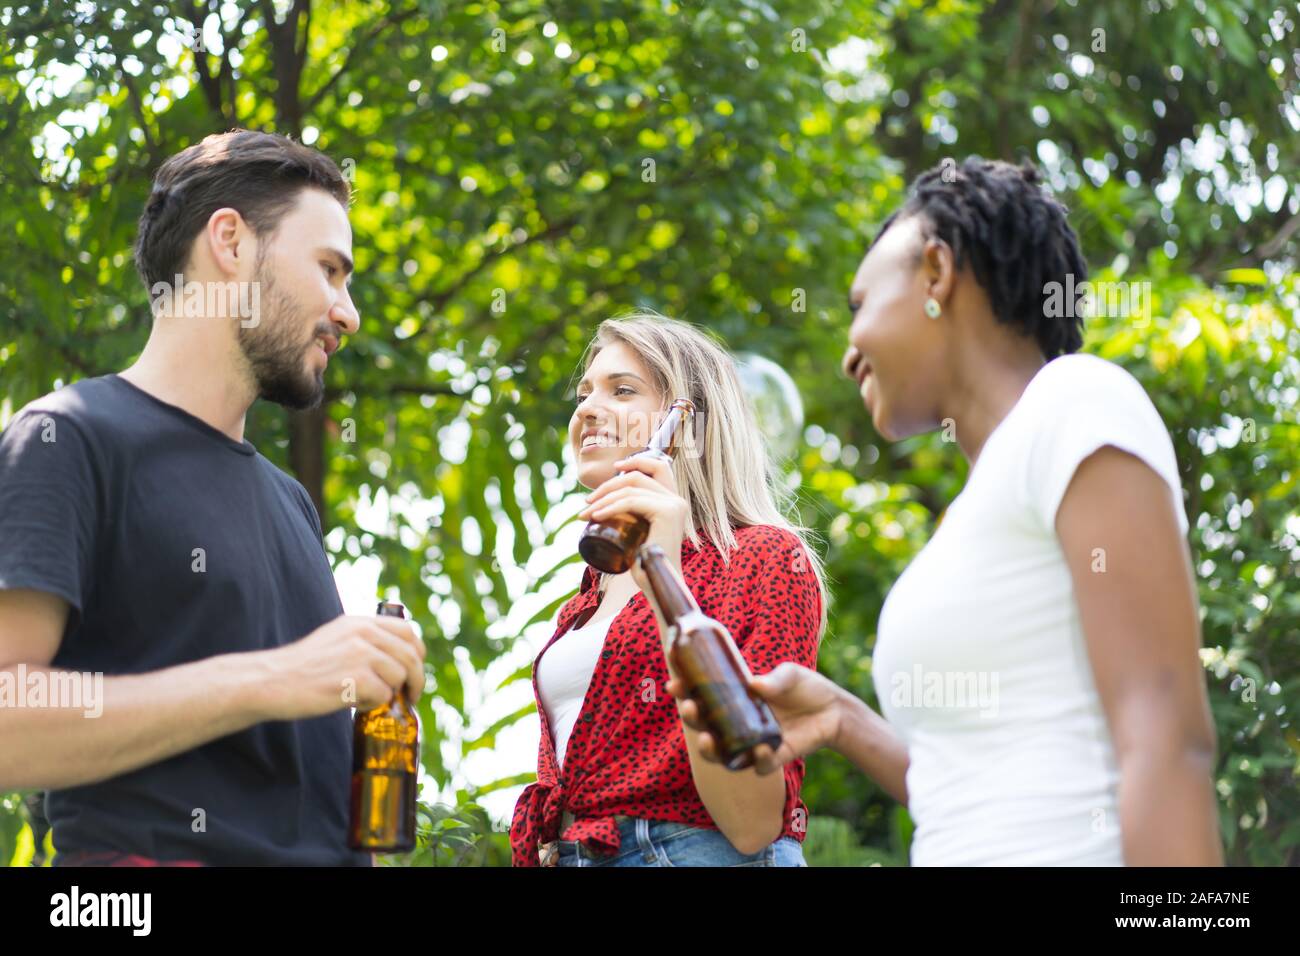 Group of friends toasting beers outdoors. Party people drinks toast celebration. Stock Photo